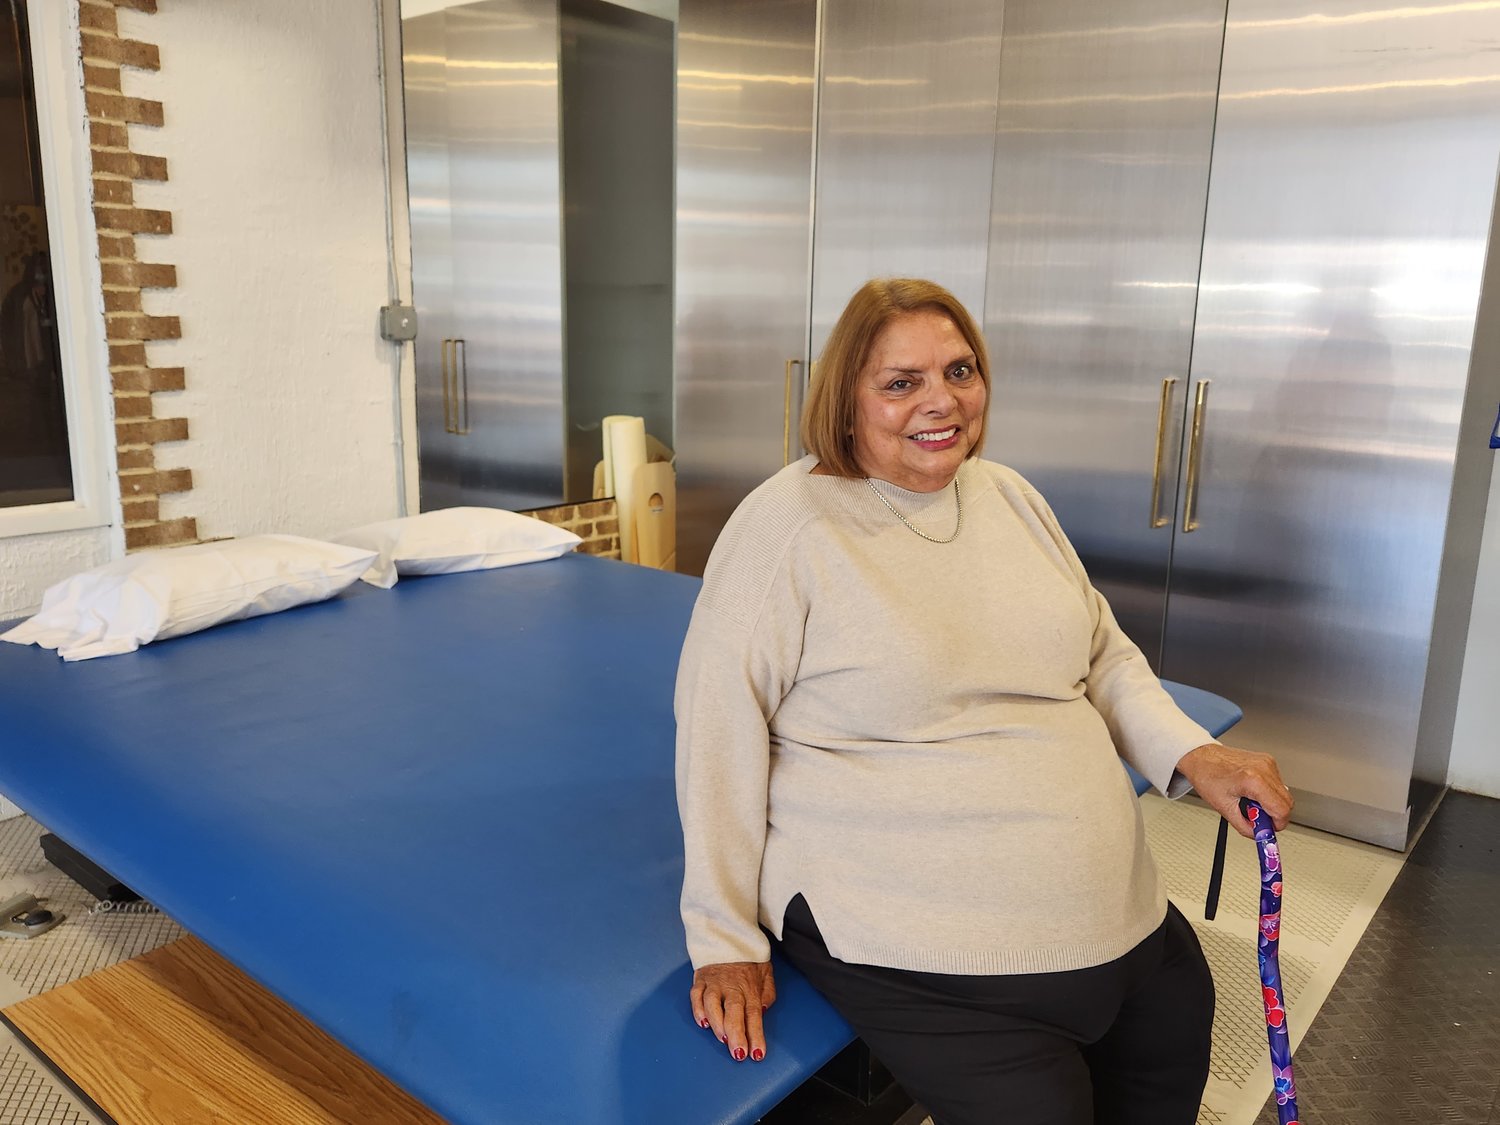 IT TOOK LINDA Dragunat, a former patient of Emerge Rehabilitation & Nursing, seven
months to recover from septic shock. She credits the rehabilitation center for her recovery
and her ability to lead an independent life.